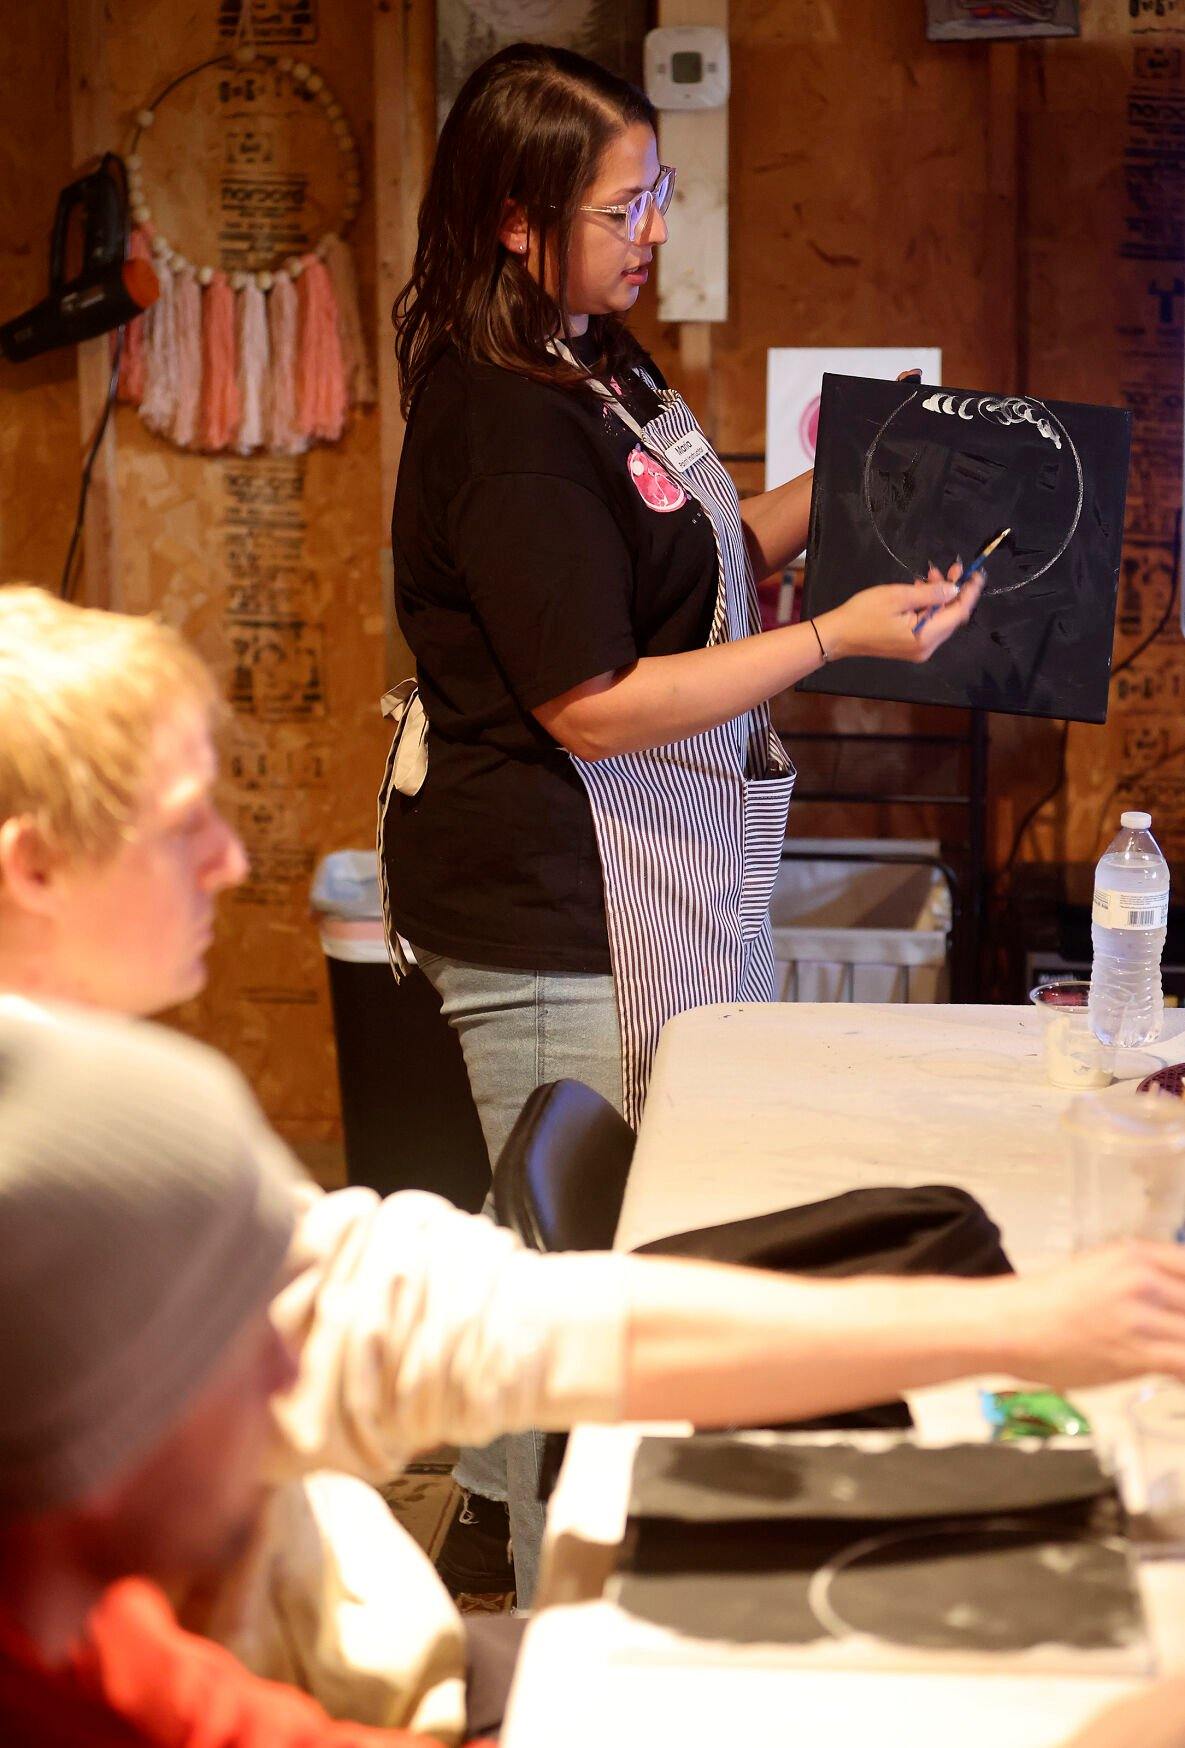 Owner of The Stoned Painter, Maria Cigrand, demonstrates to her students during a class held in East Dubuque, Ill.    PHOTO CREDIT: Dave Kettering
Telegraph Herald